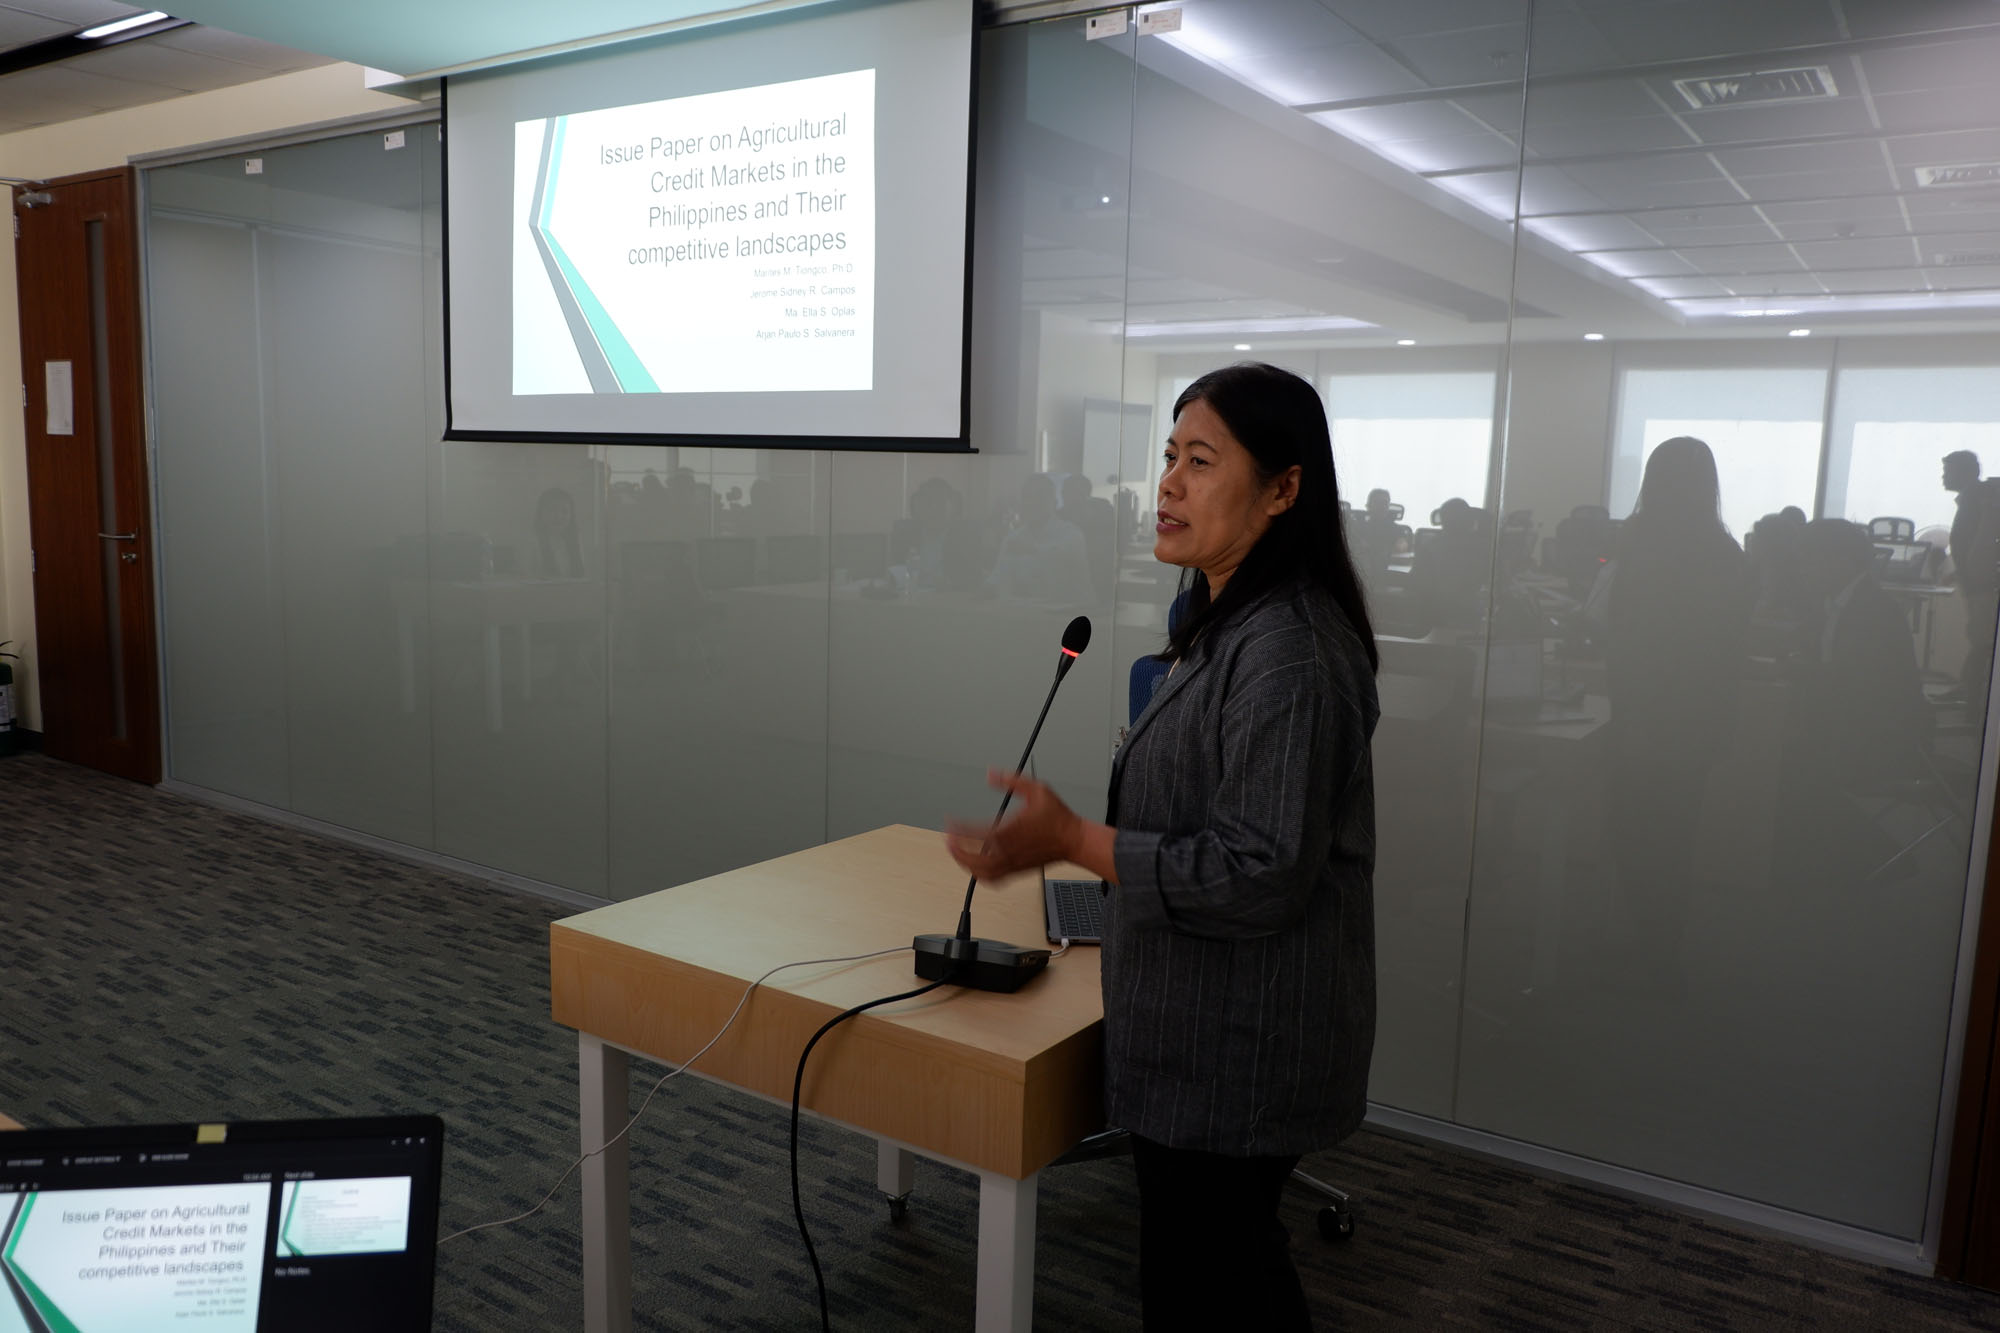 Competition Issues on Agriculture Credit Markets in the Philippines and Their Competitive Landscapes-pcc-agri-8-20180223.jpg